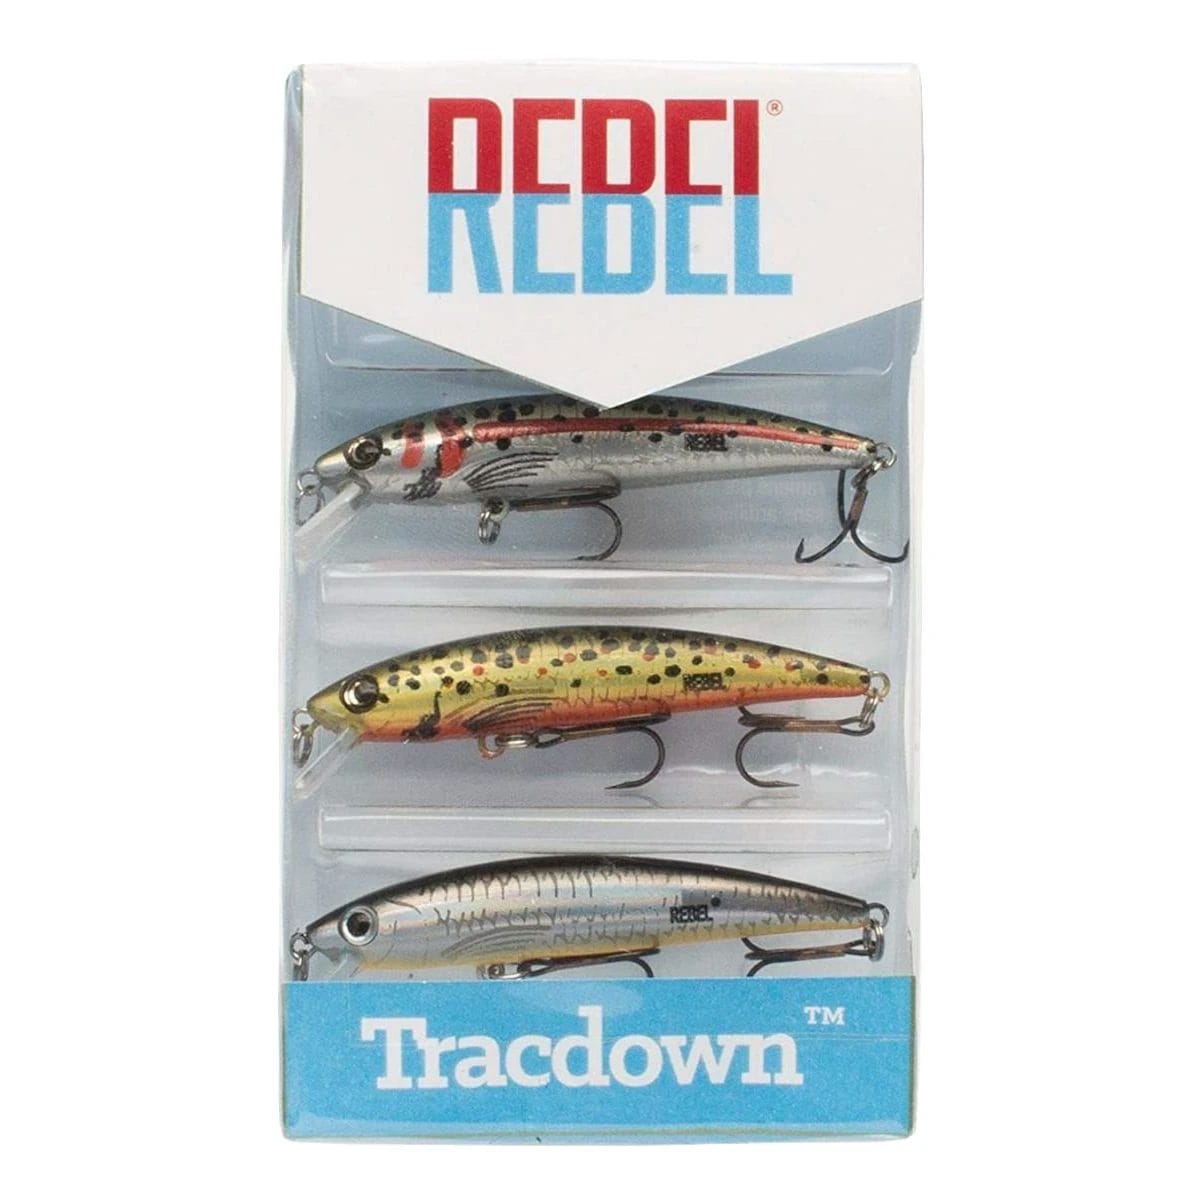  Rebel Lures Tracdown Minnow Slow-Sinking Crankbait Fishing Lure  - Great for Bass, Trout and Walleye, Slick Black Minnow, 1 5/8 in, 3/32 oz  : Fishing Soft Plastic Lures : Sports & Outdoors